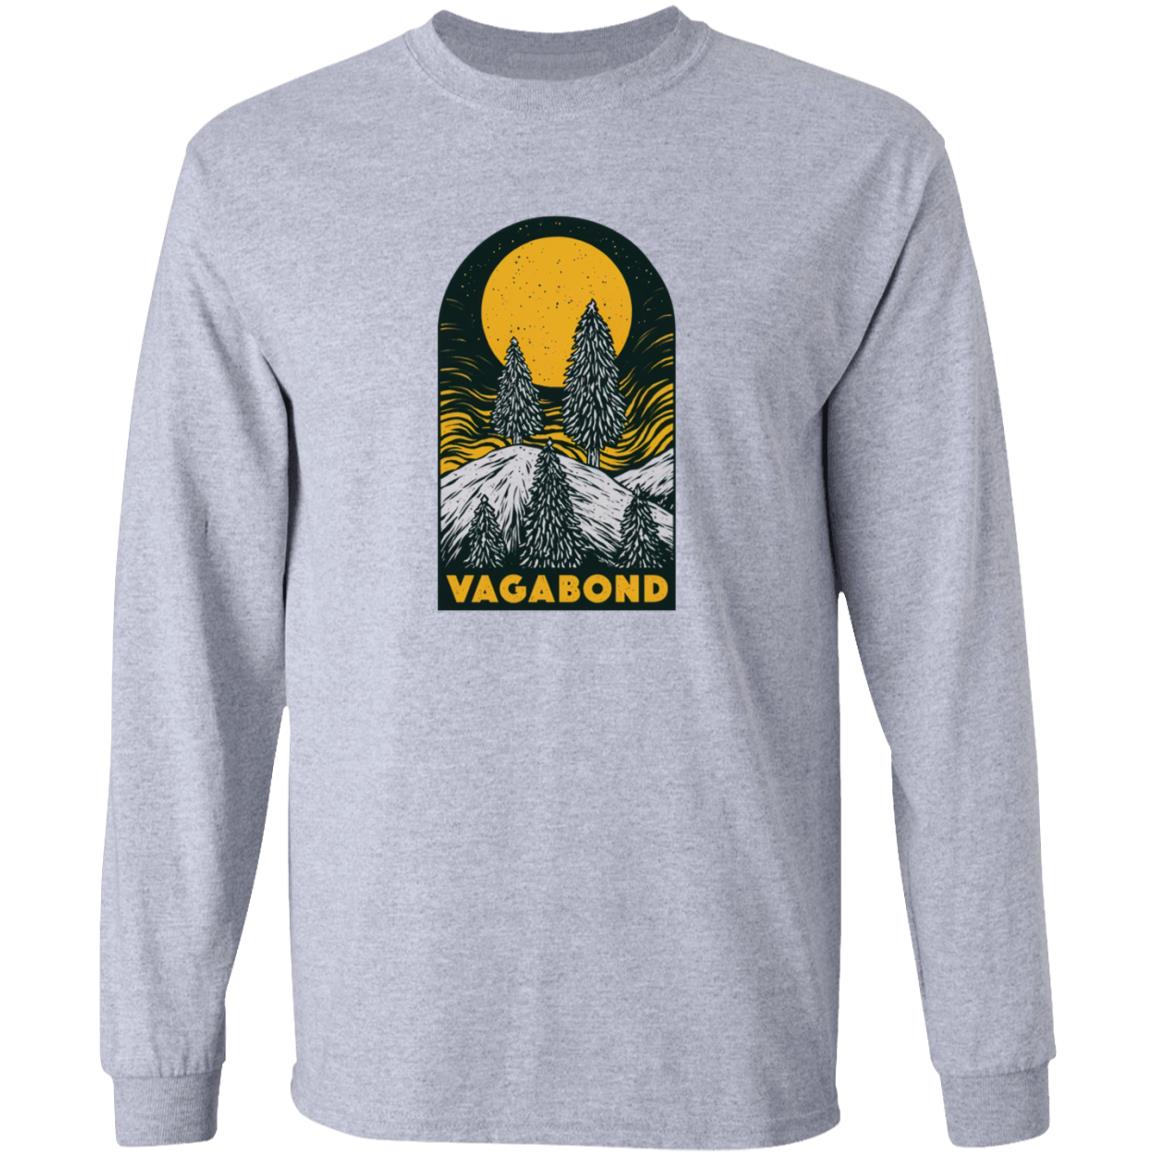 Vagabond Merchandise: Express Your Love for Travel and Freedom